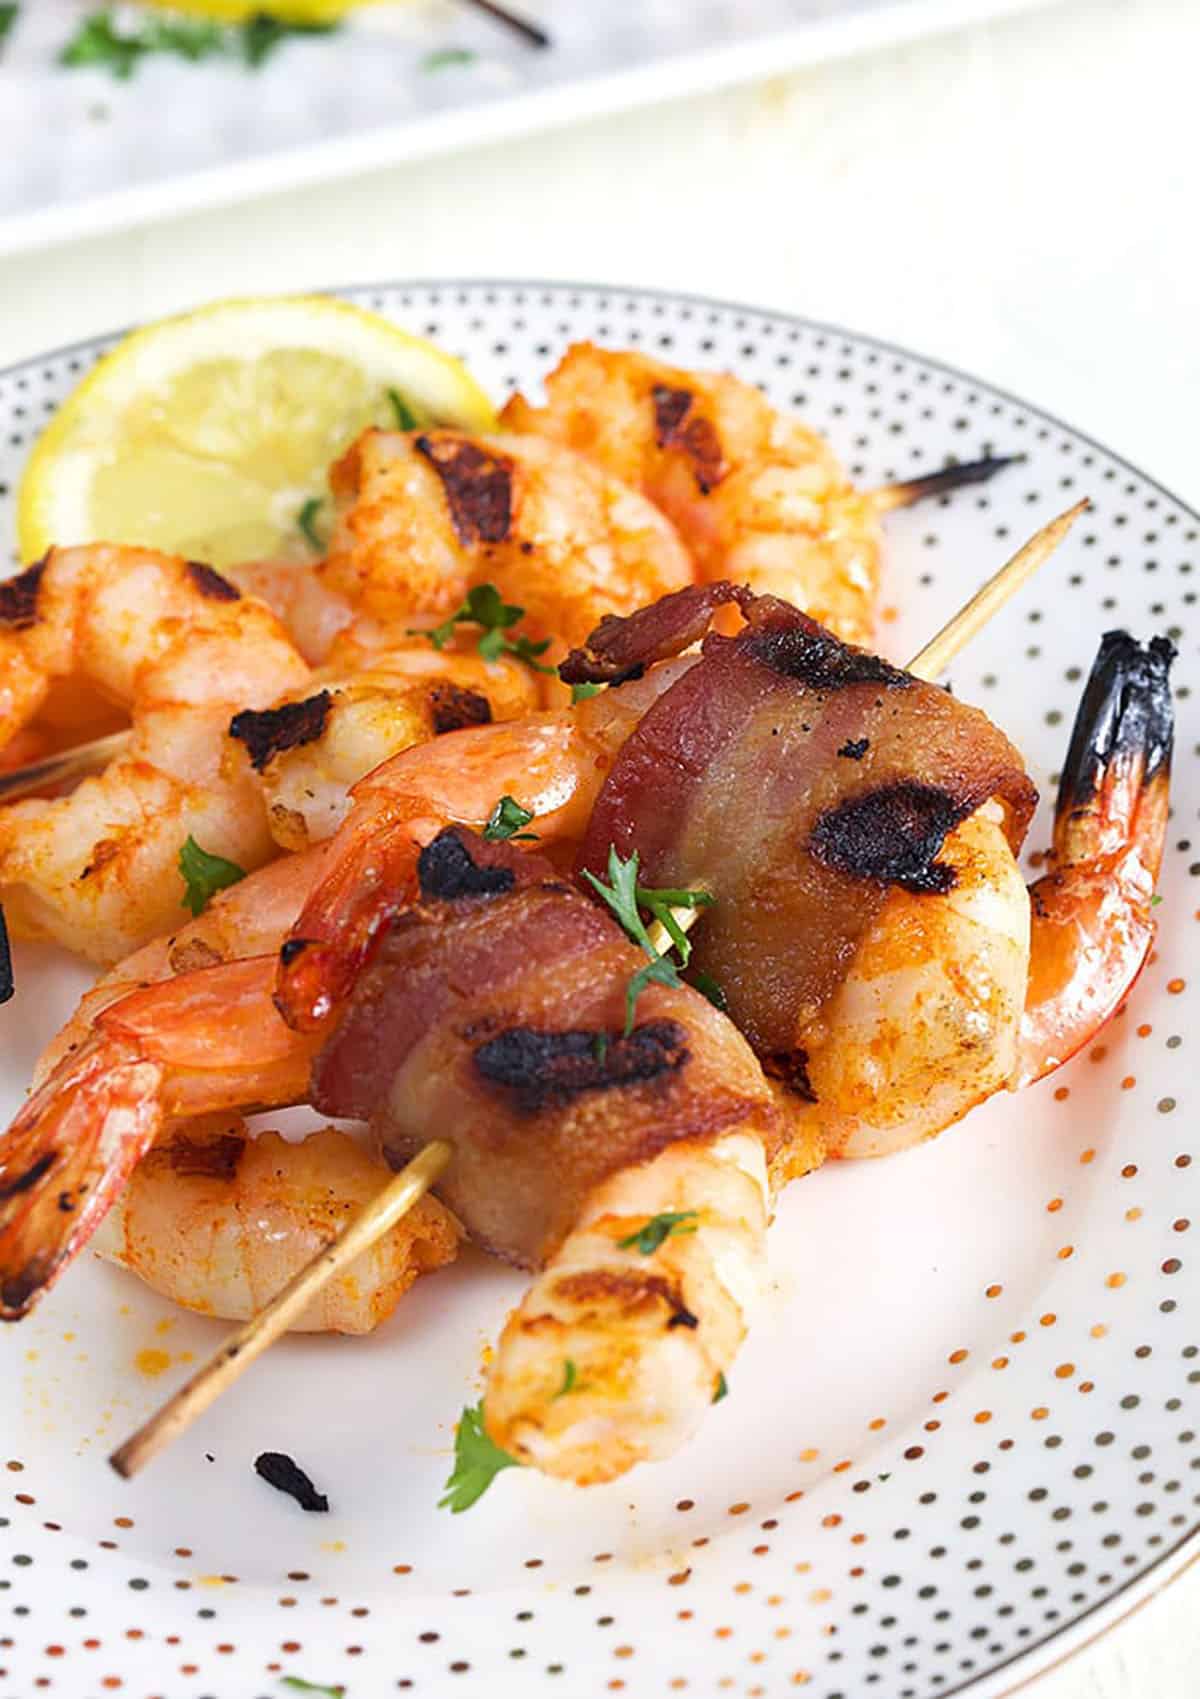 Bacon wrapped shrimp on a bamboo skewer on a white plate with gold polka dots and a lemon slice on the plate.